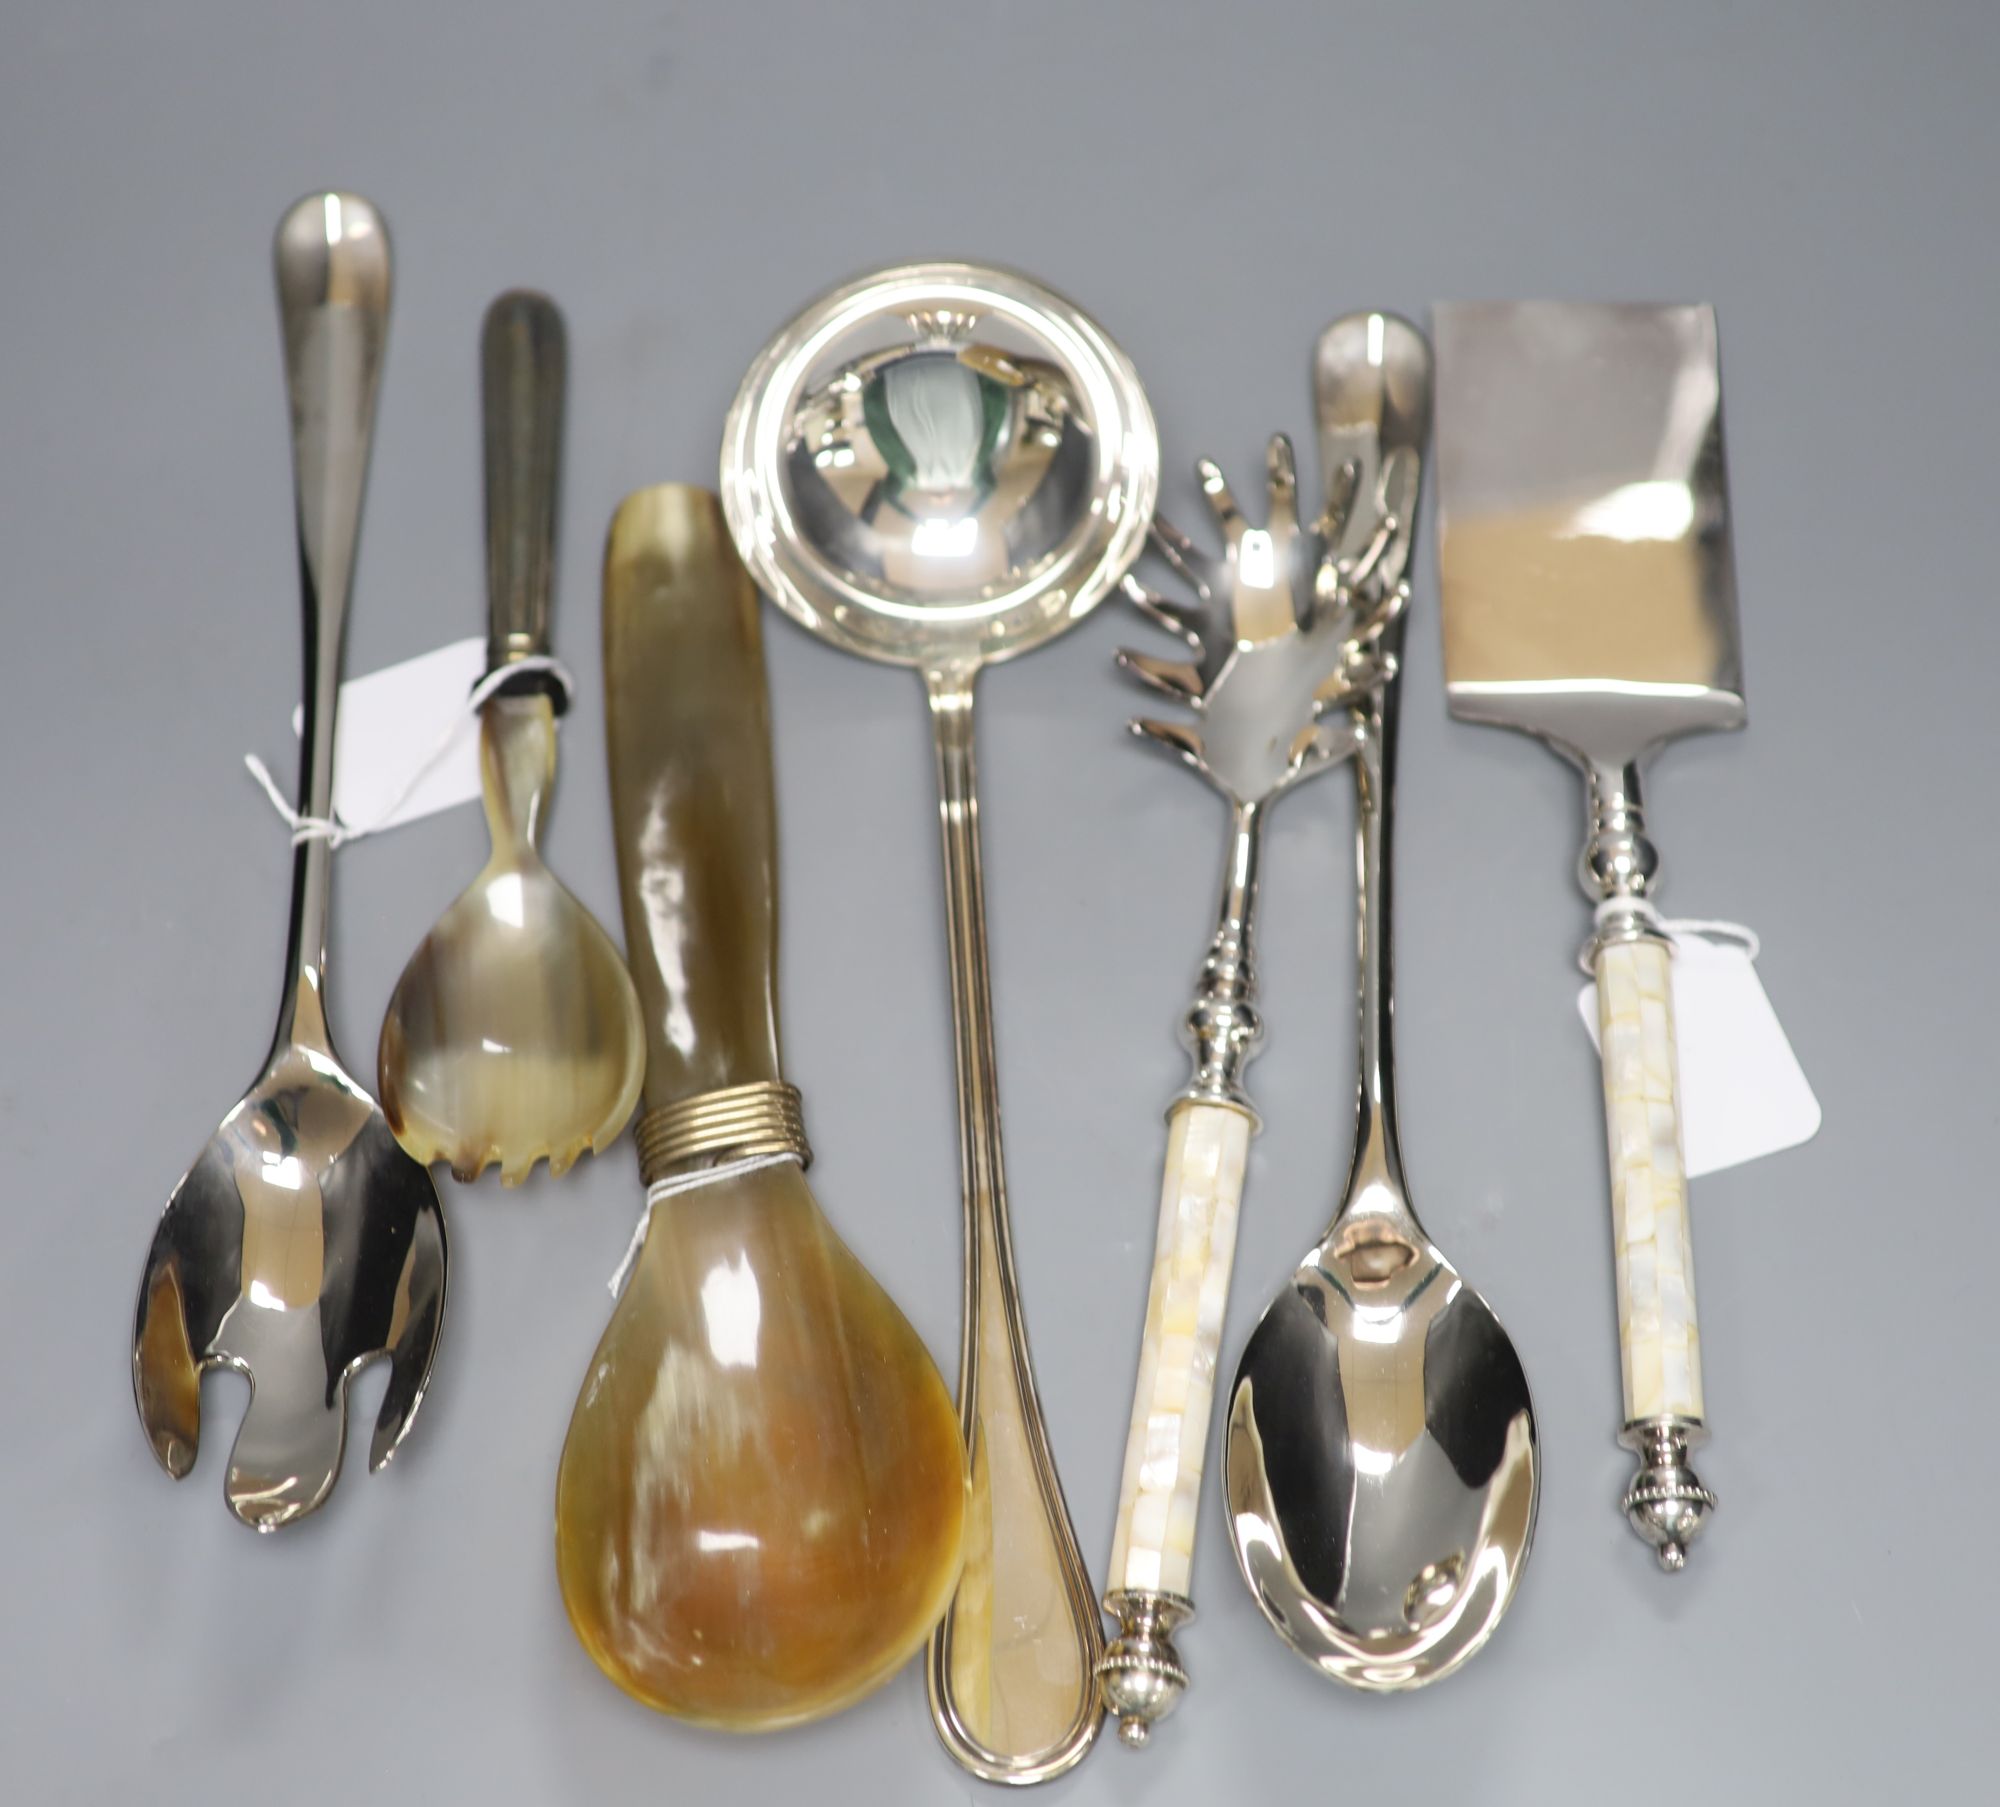 An 800 standard silver ladle and various serving items, ladle approx 6.5oz